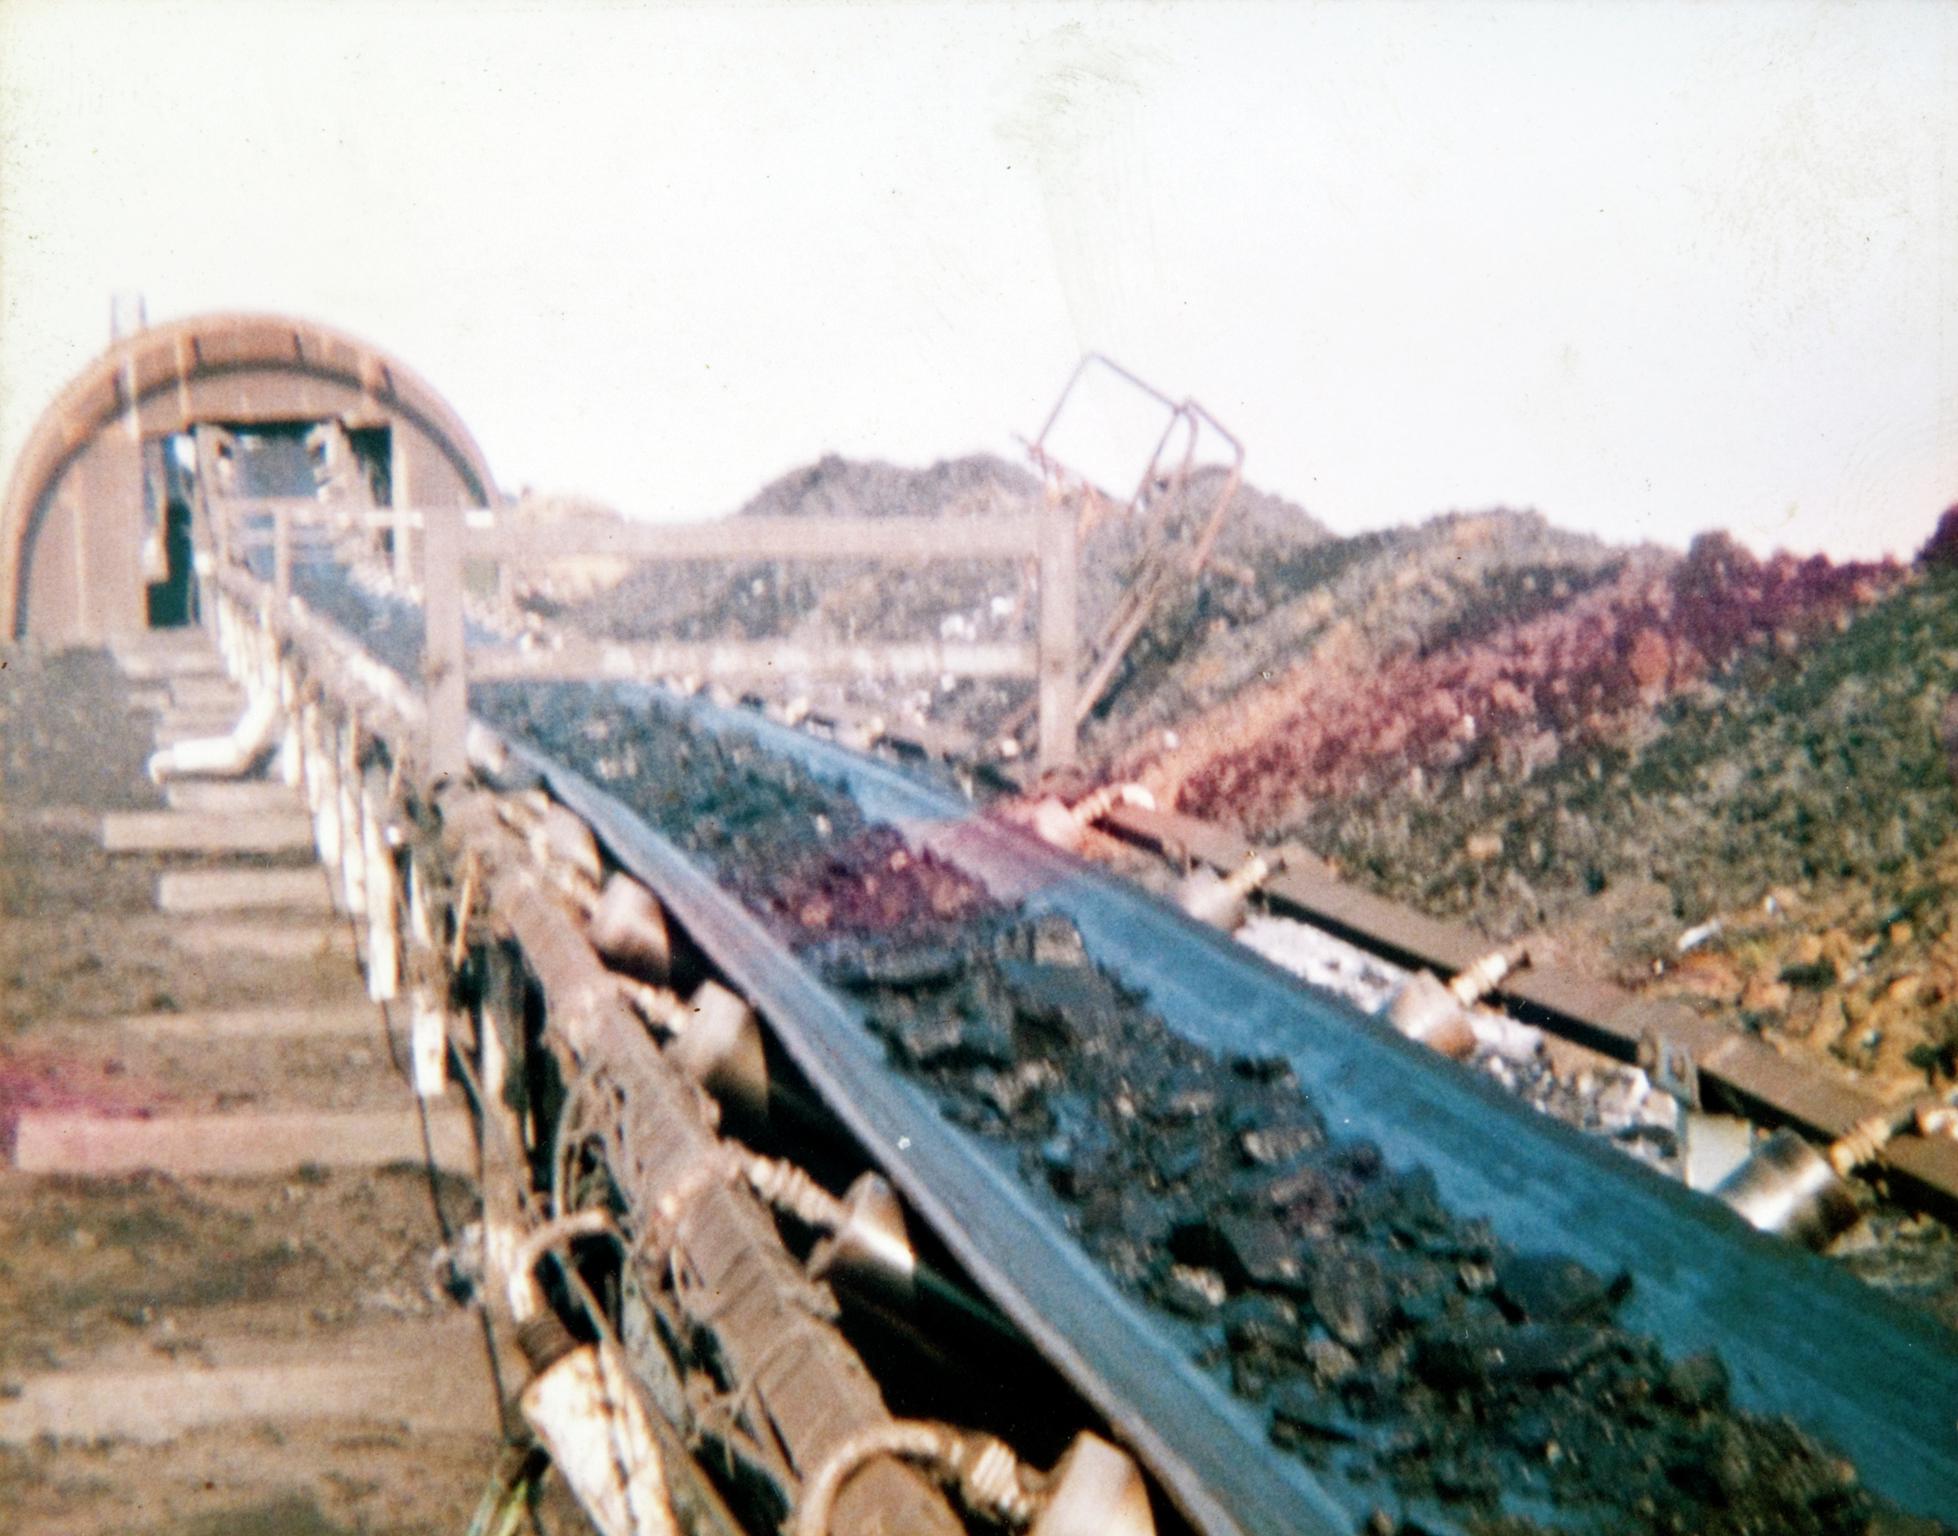 Big Pit Colliery, photograph